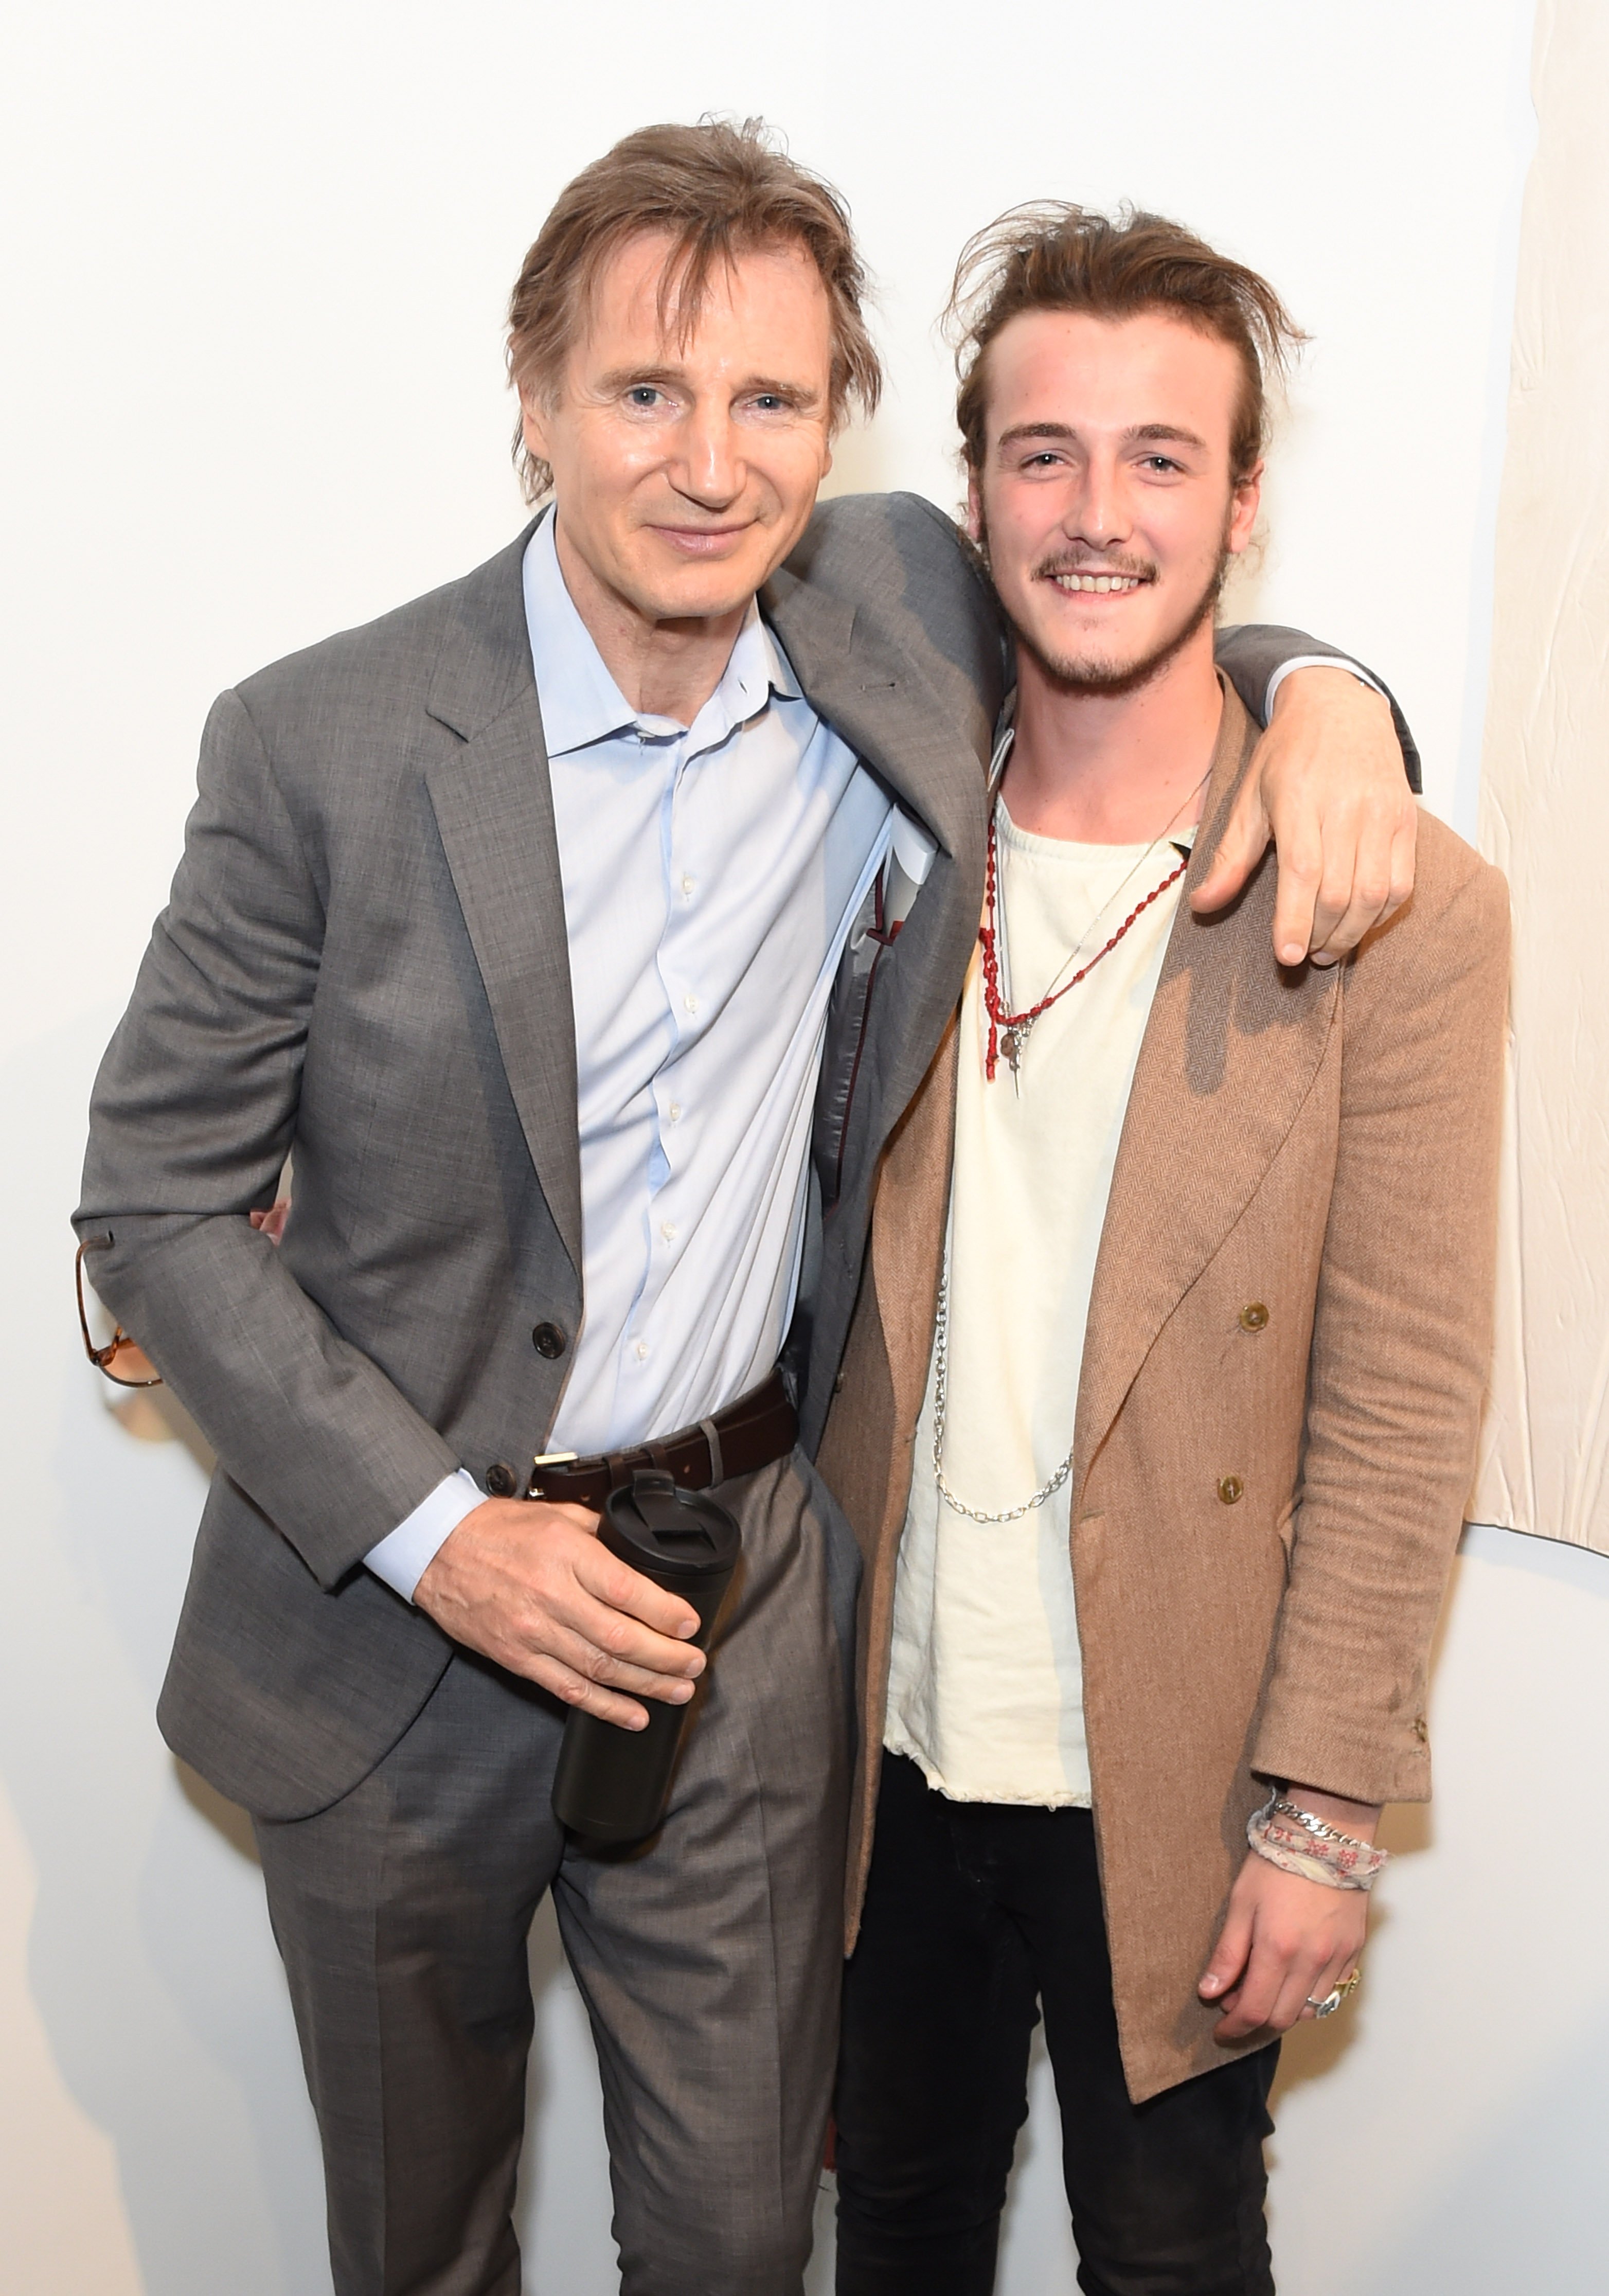 Liam Neeson and Michael Neeson attend the Maison Mais Non-launch party as Micheal launches a fashion gallery in Soho on June 2, 2015, in London, England. | Source: Getty Images